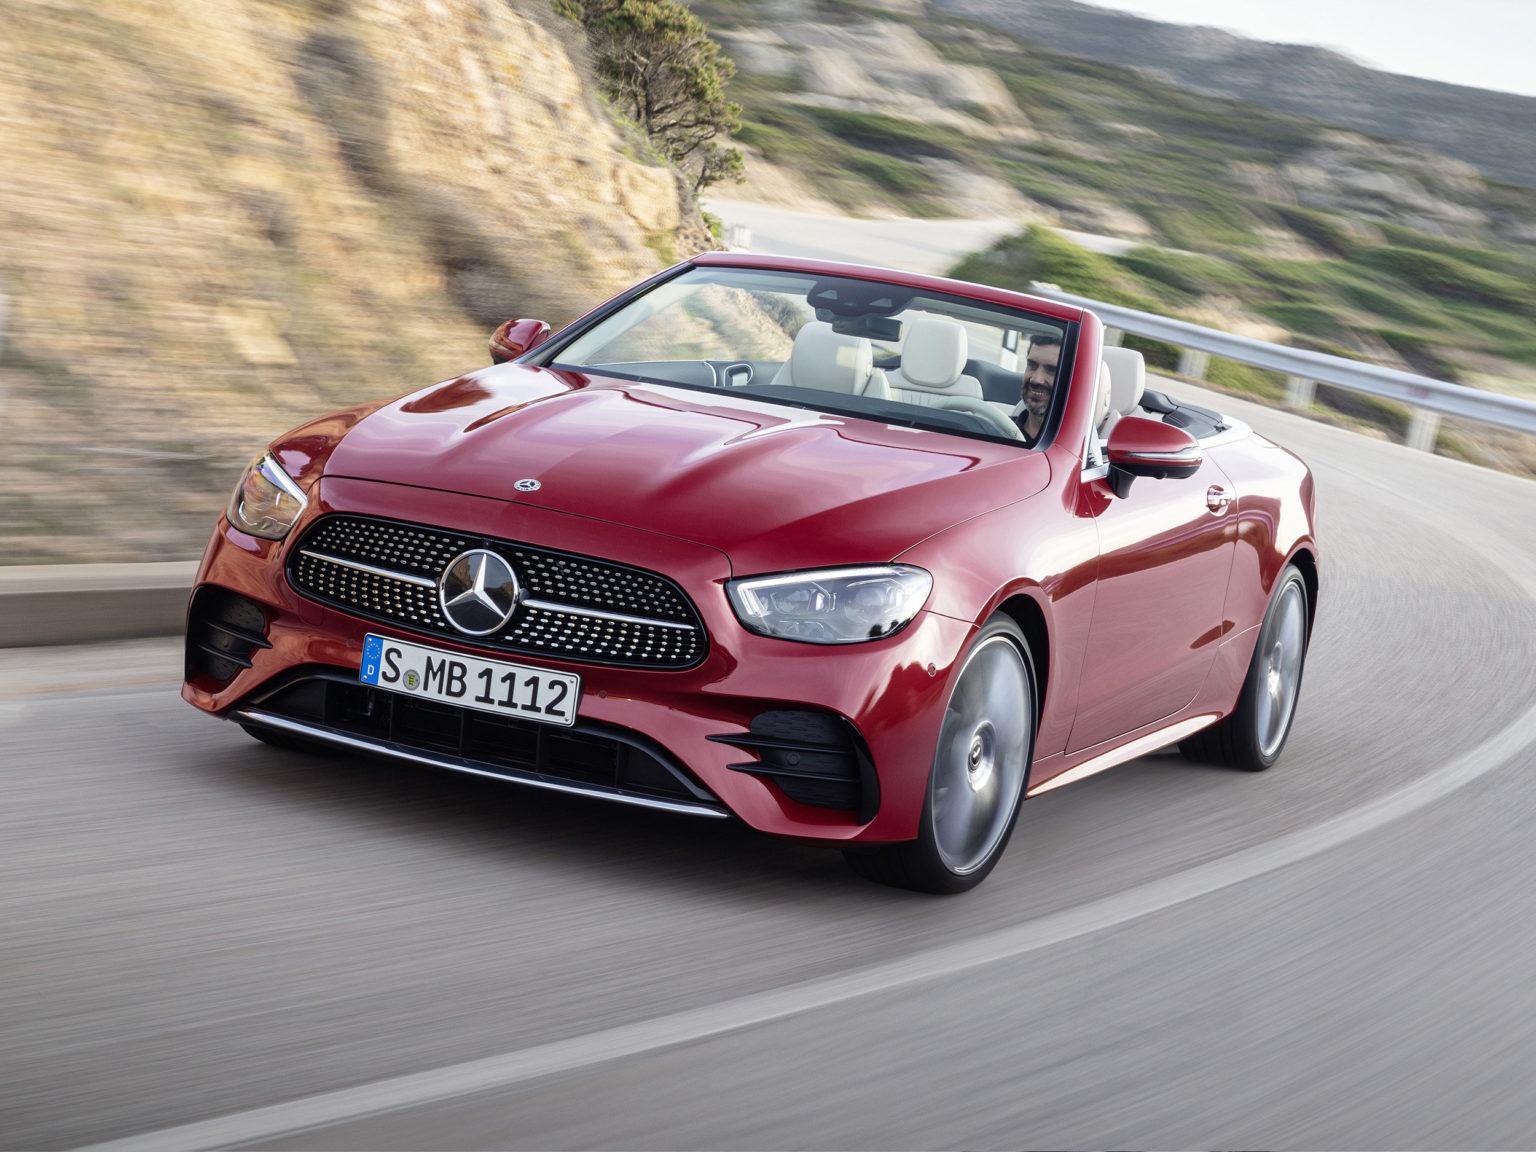 Mercedes-Benz has refreshed the interior and exterior of the E-Class coupe and cabriolet.